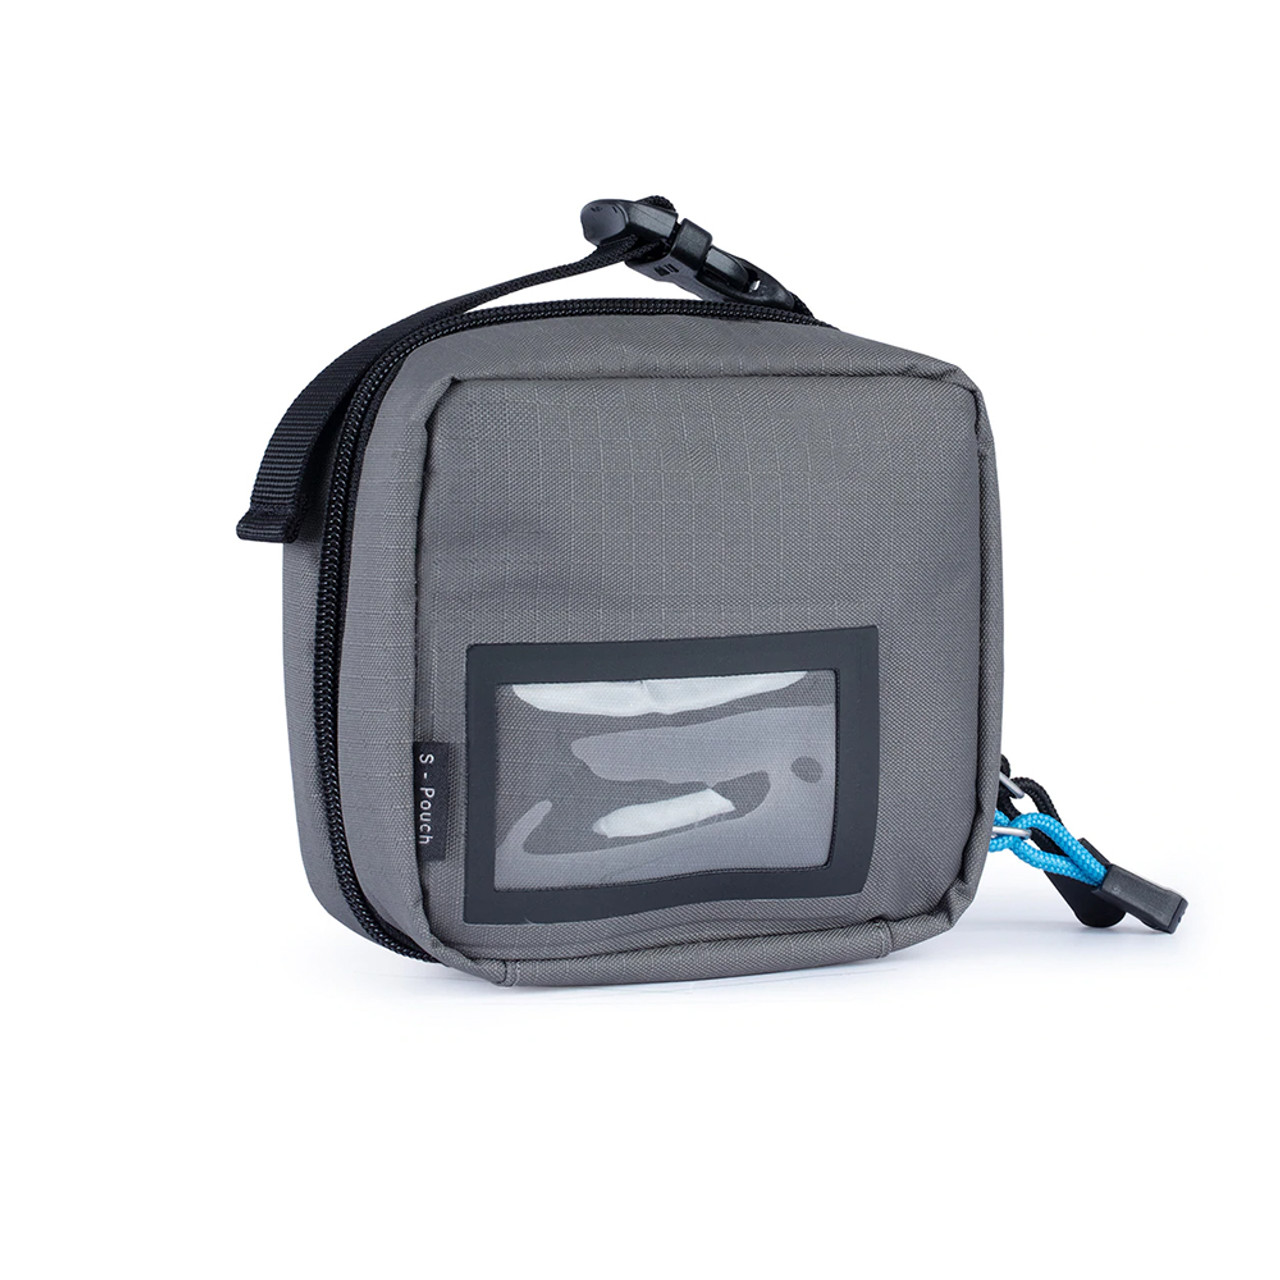 F-STOP WELDED SMALL ACCESSORY POUCH GREY/BLACK ZIP